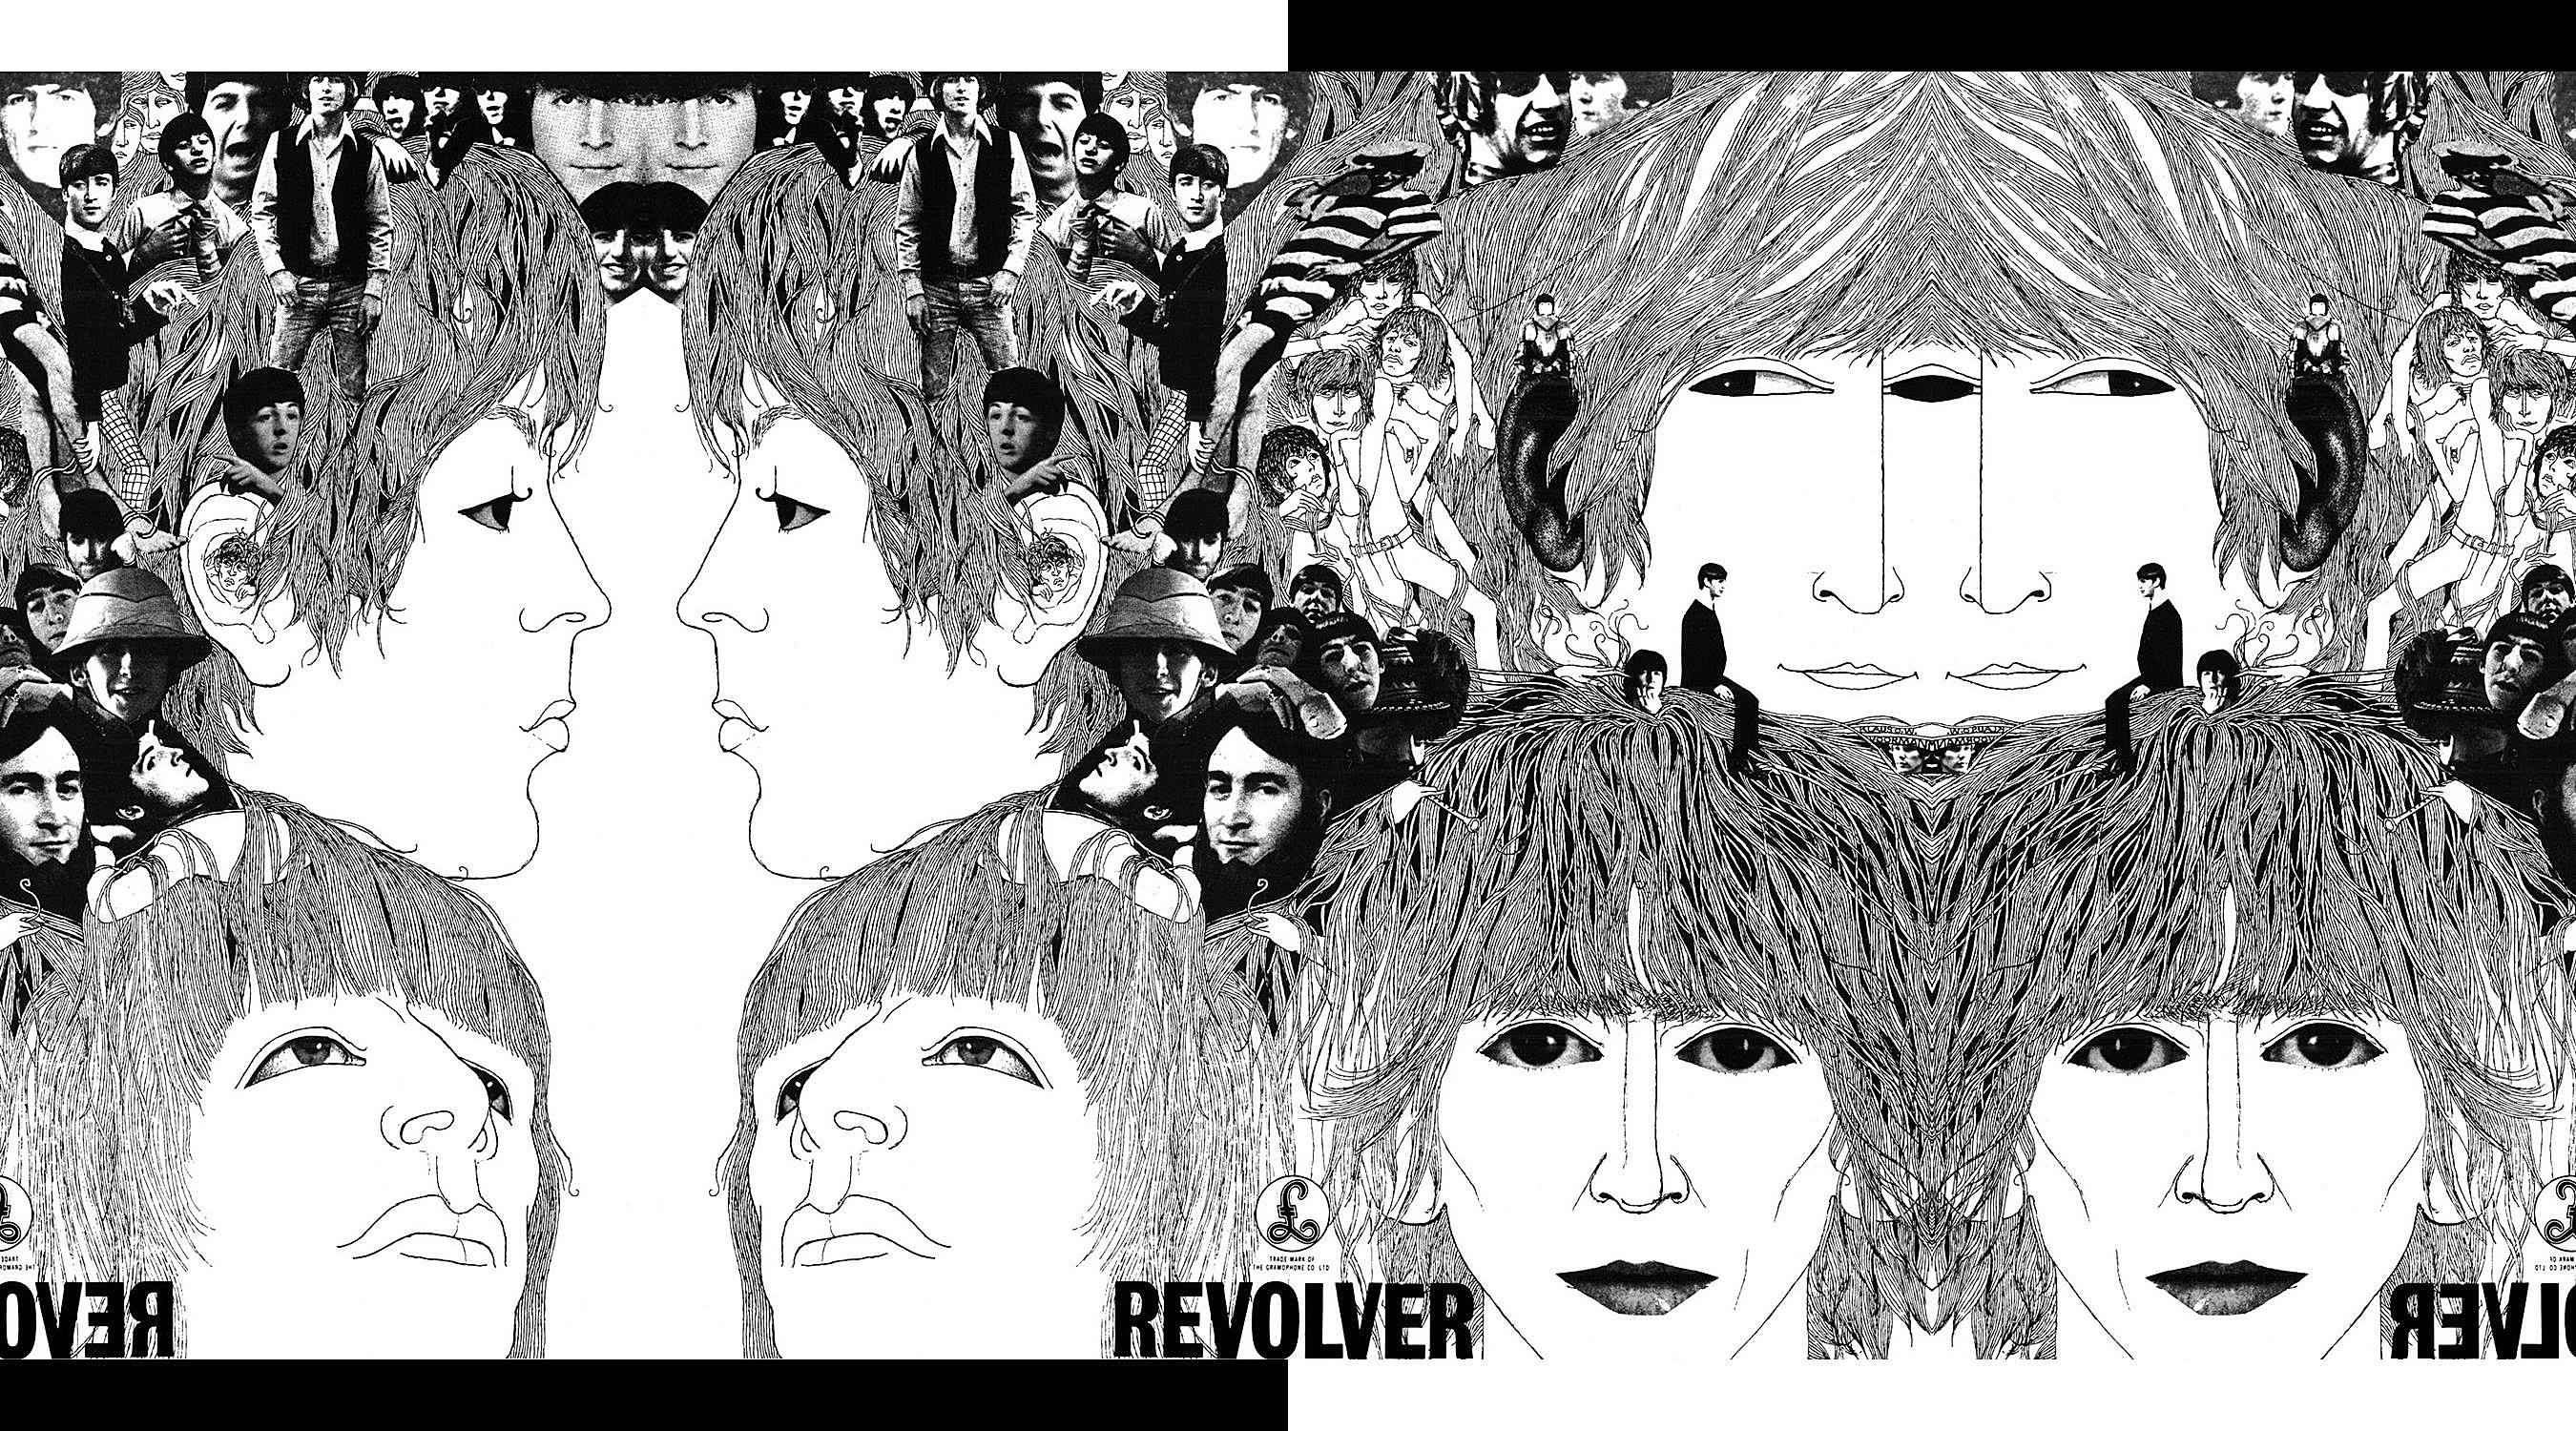 0031 - The Beatles - Revolver by sunsetcolors on DeviantArt